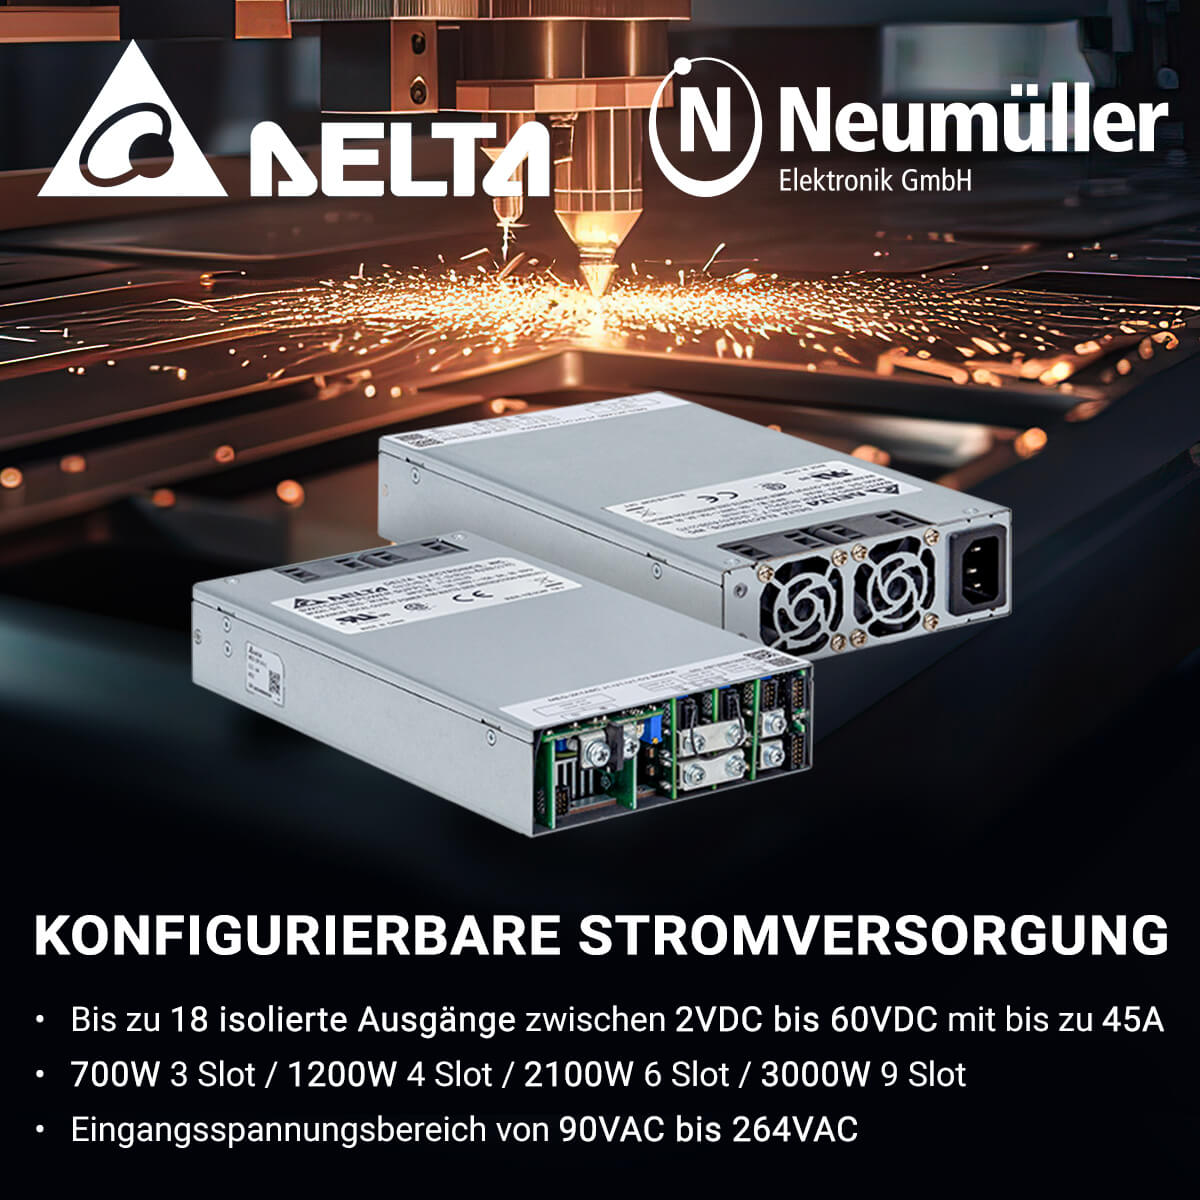 Configurable power supplies up to 3000W with variable output voltage